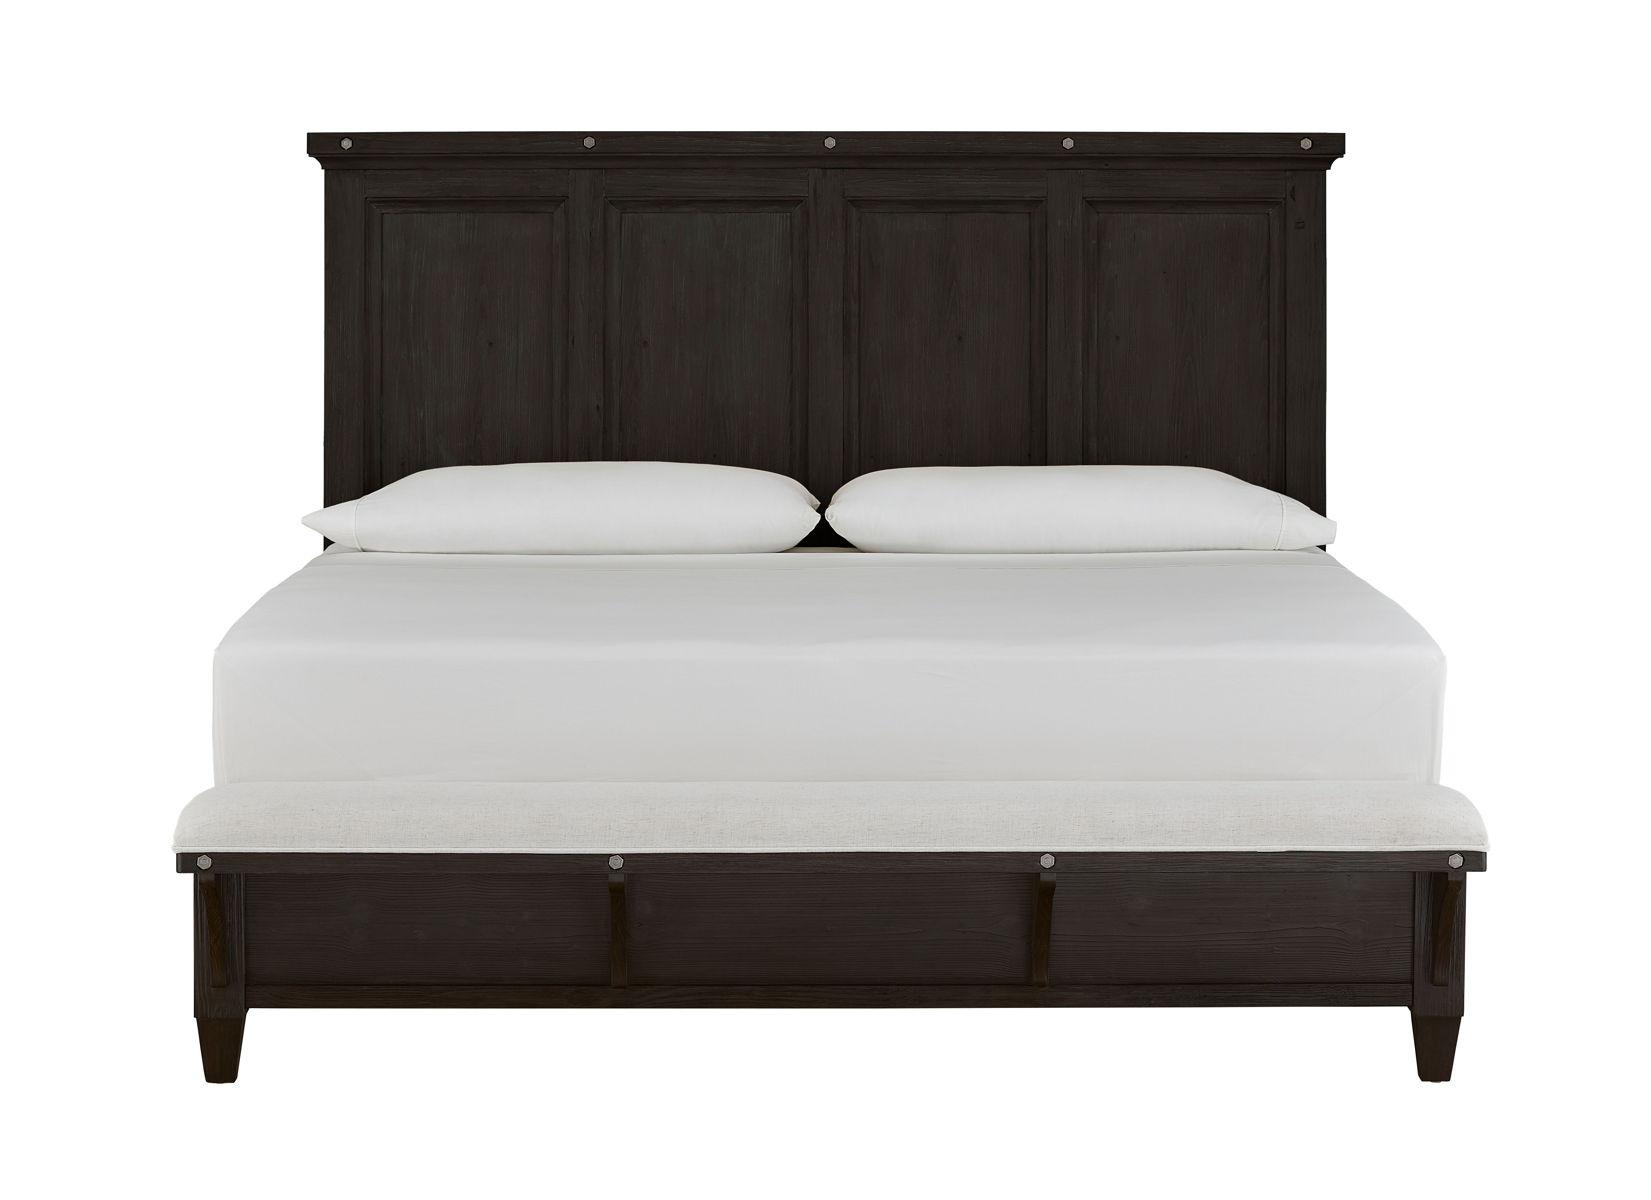 Magnussen Furniture - Sierra - Complete Panel Bed With Upholstered Footboard - 5th Avenue Furniture